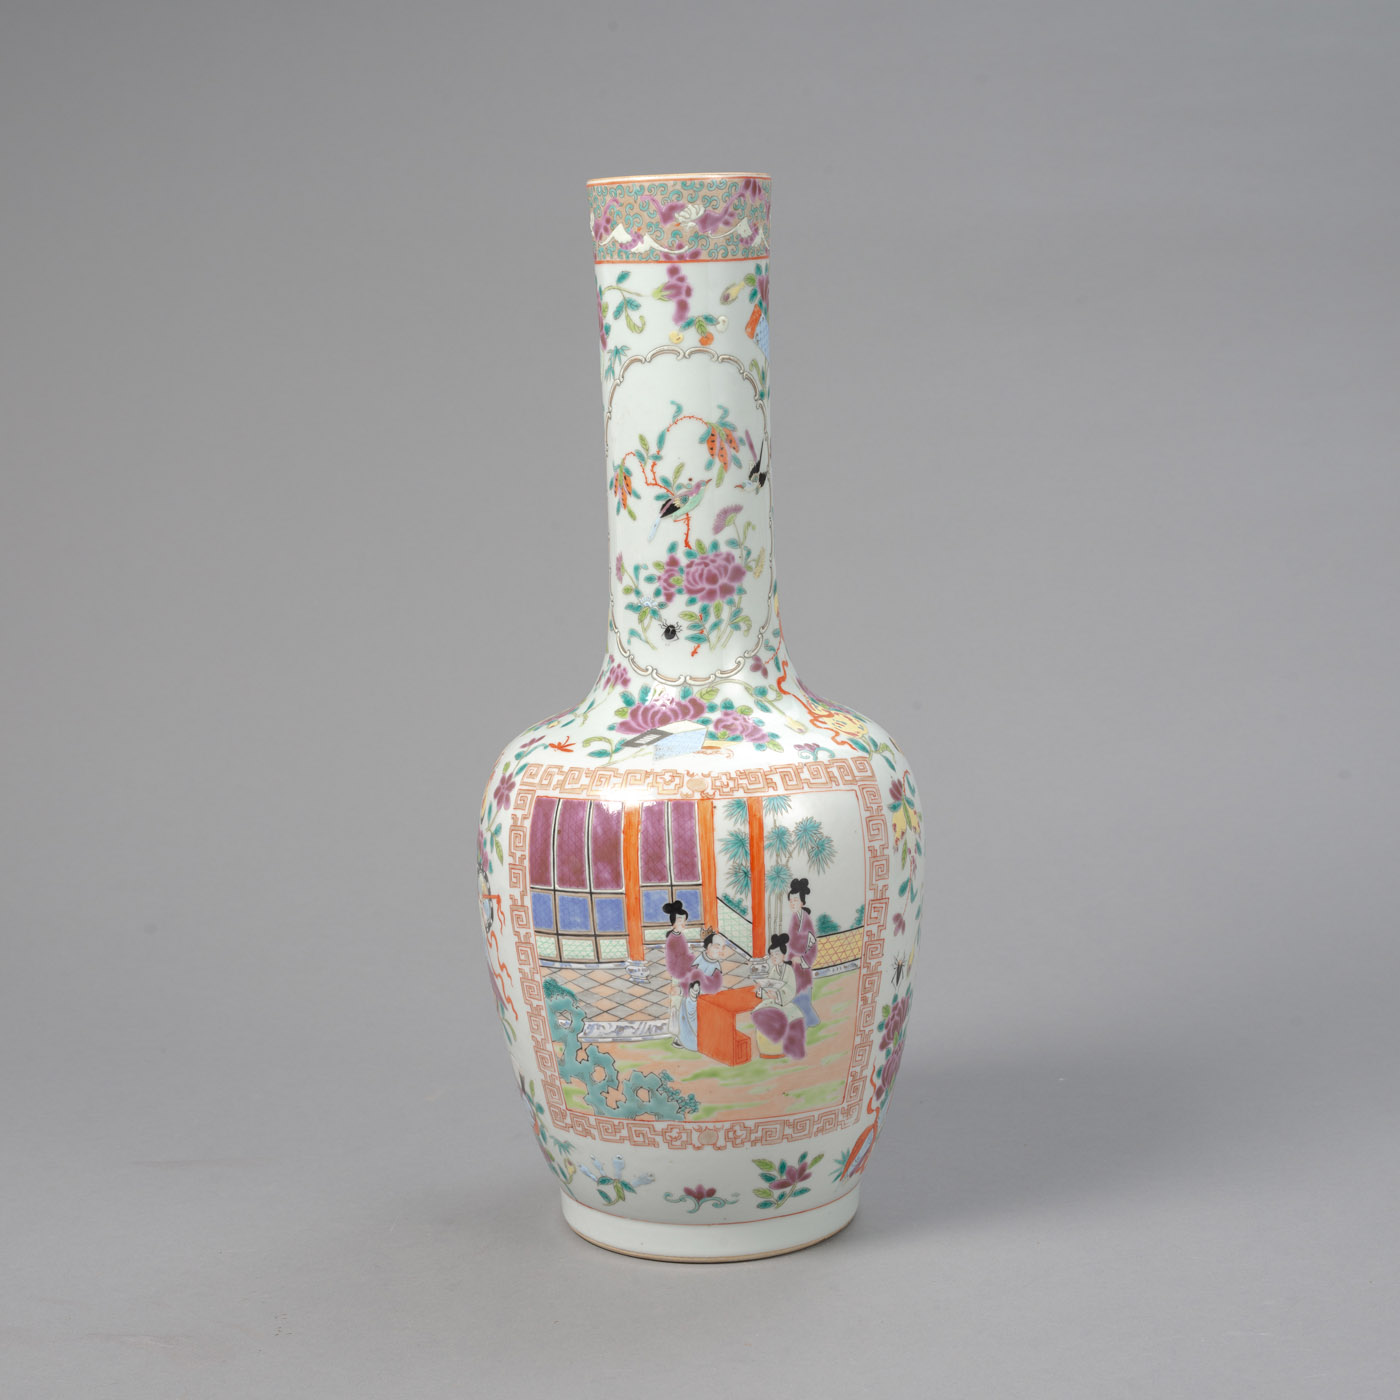 <b>A 'FAMILLE ROSE' LONG NECKED PORCELAIN VASE WITH FIGURES, BLOSSOMS, INSECTS AND BIRDS</b>